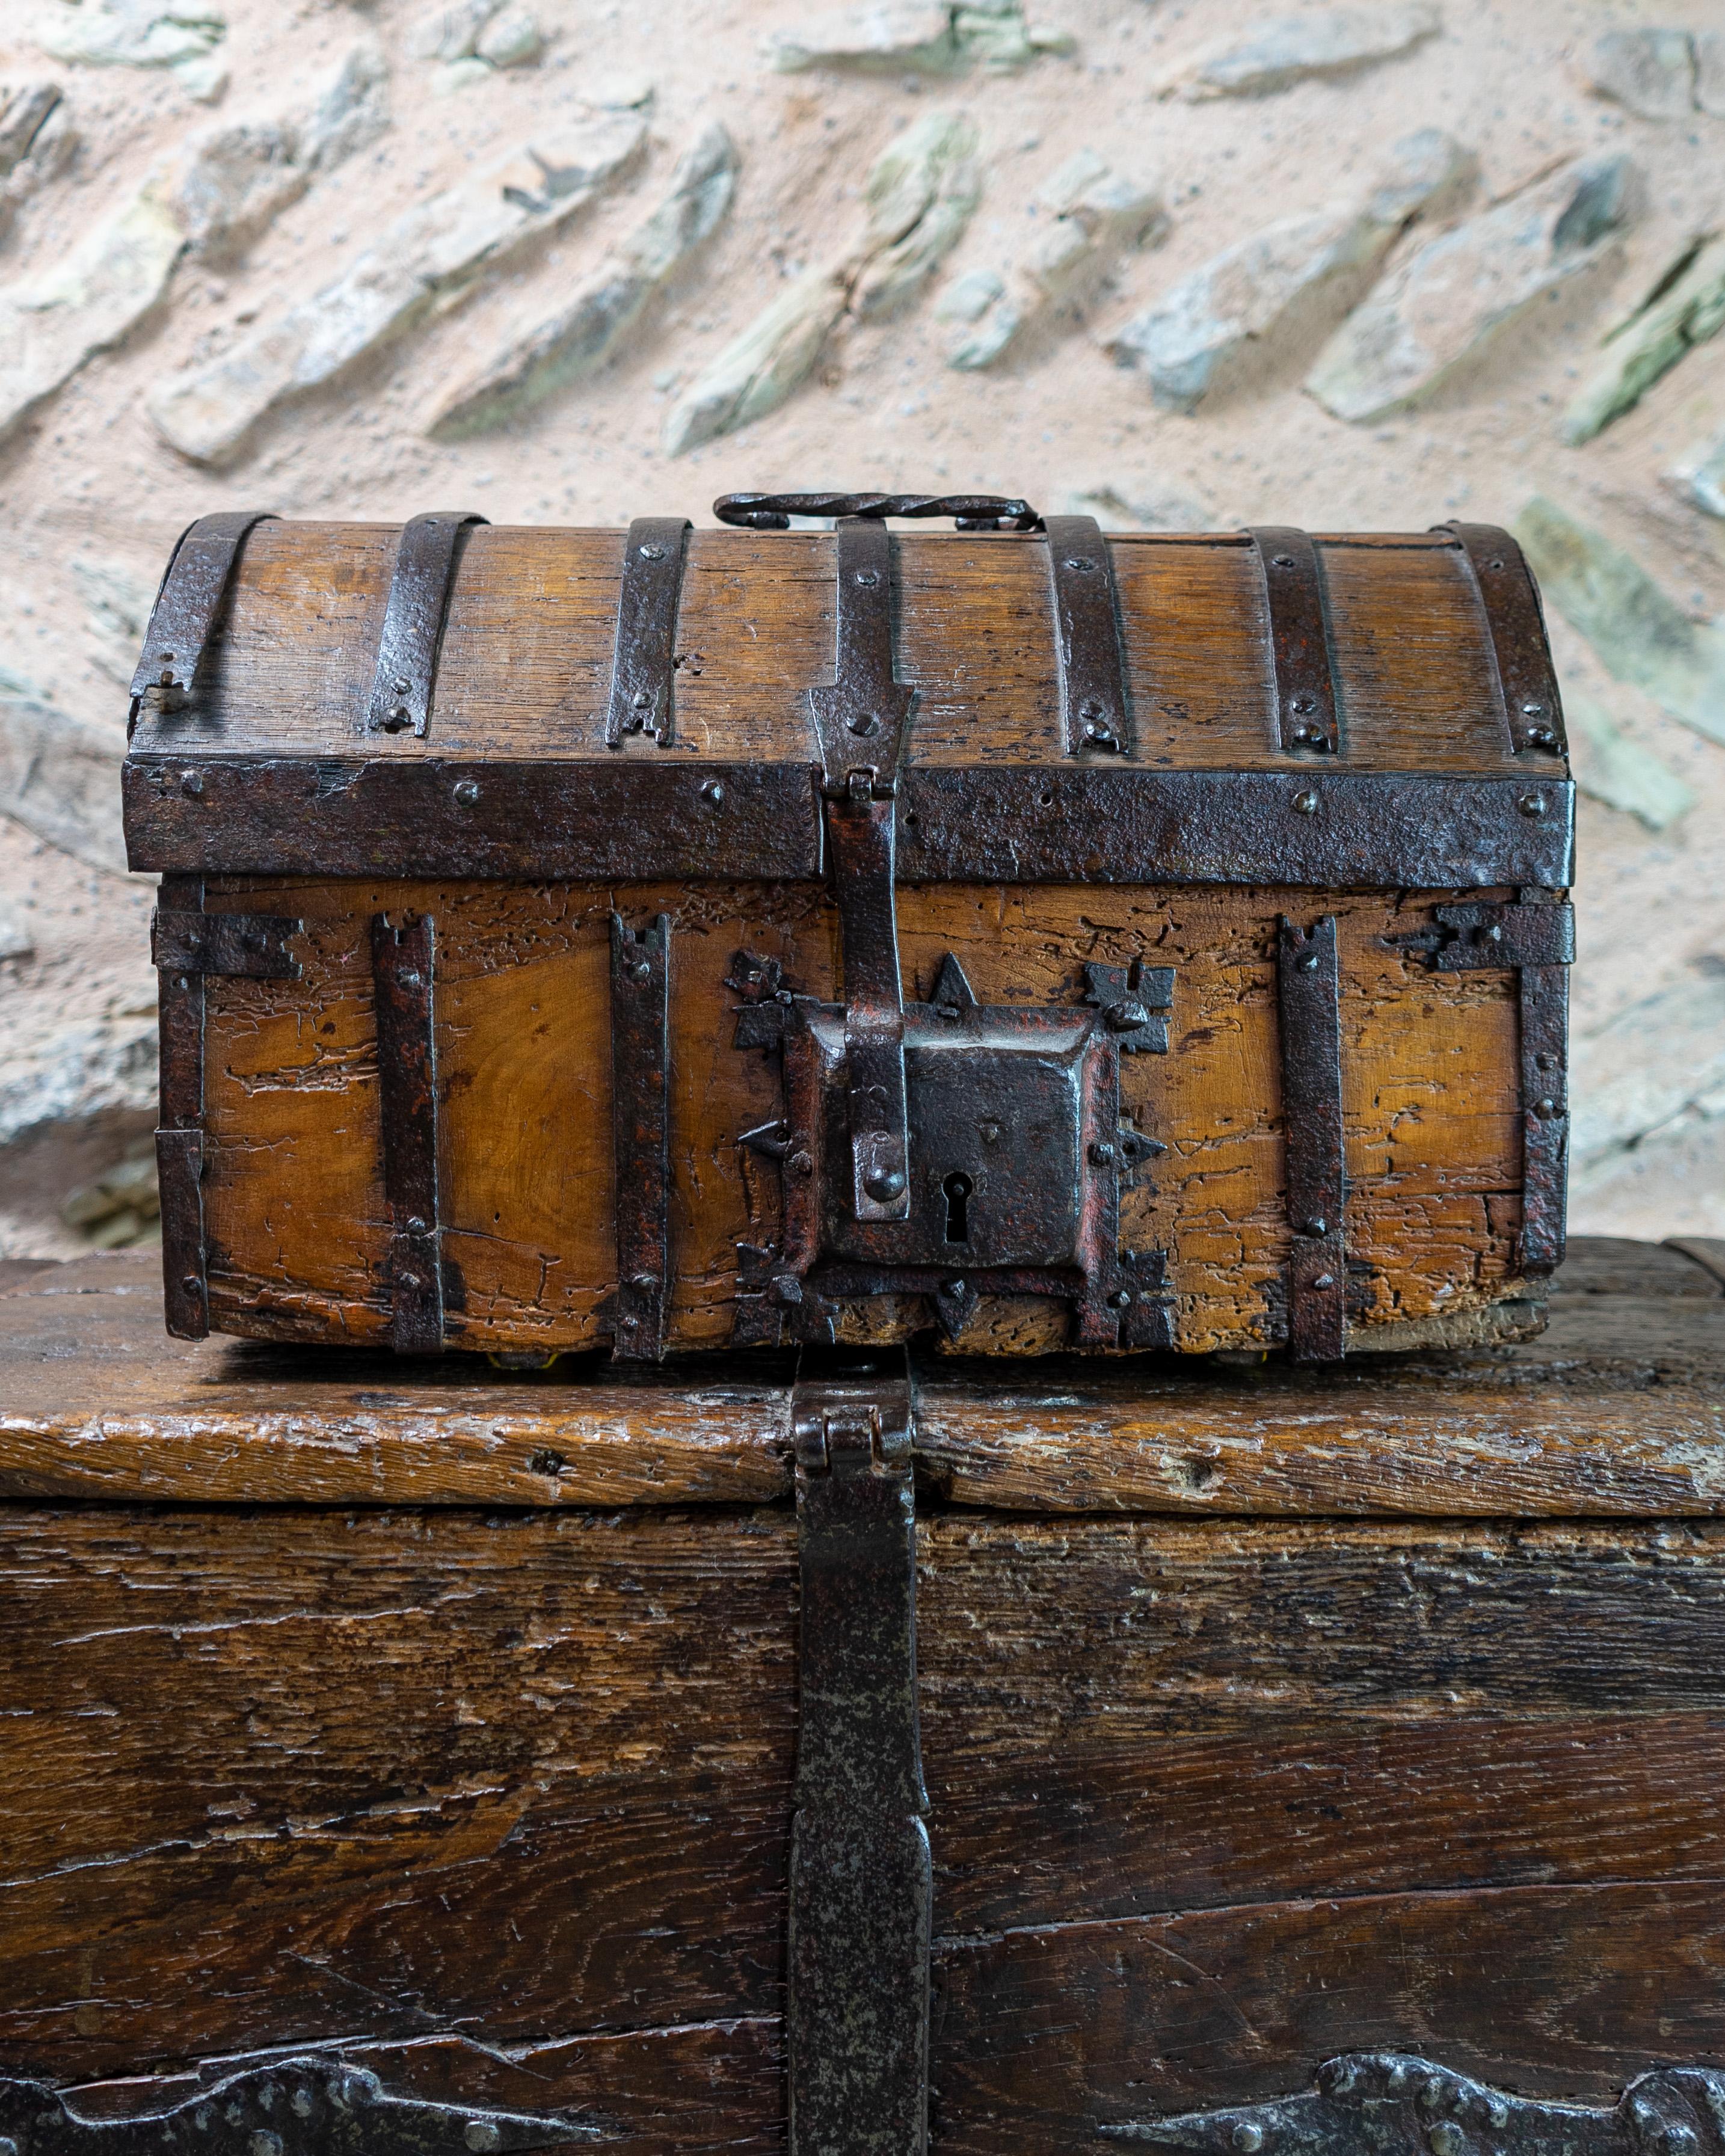 16th century, Late Gothic, iron bound casket, French, Circa 1500-1540

Rectangular casket with round-arched lid, with a twisted wrought iron handle on the lid, and a hasp and lock. The casket is bound & strengthened with iron showing traces of